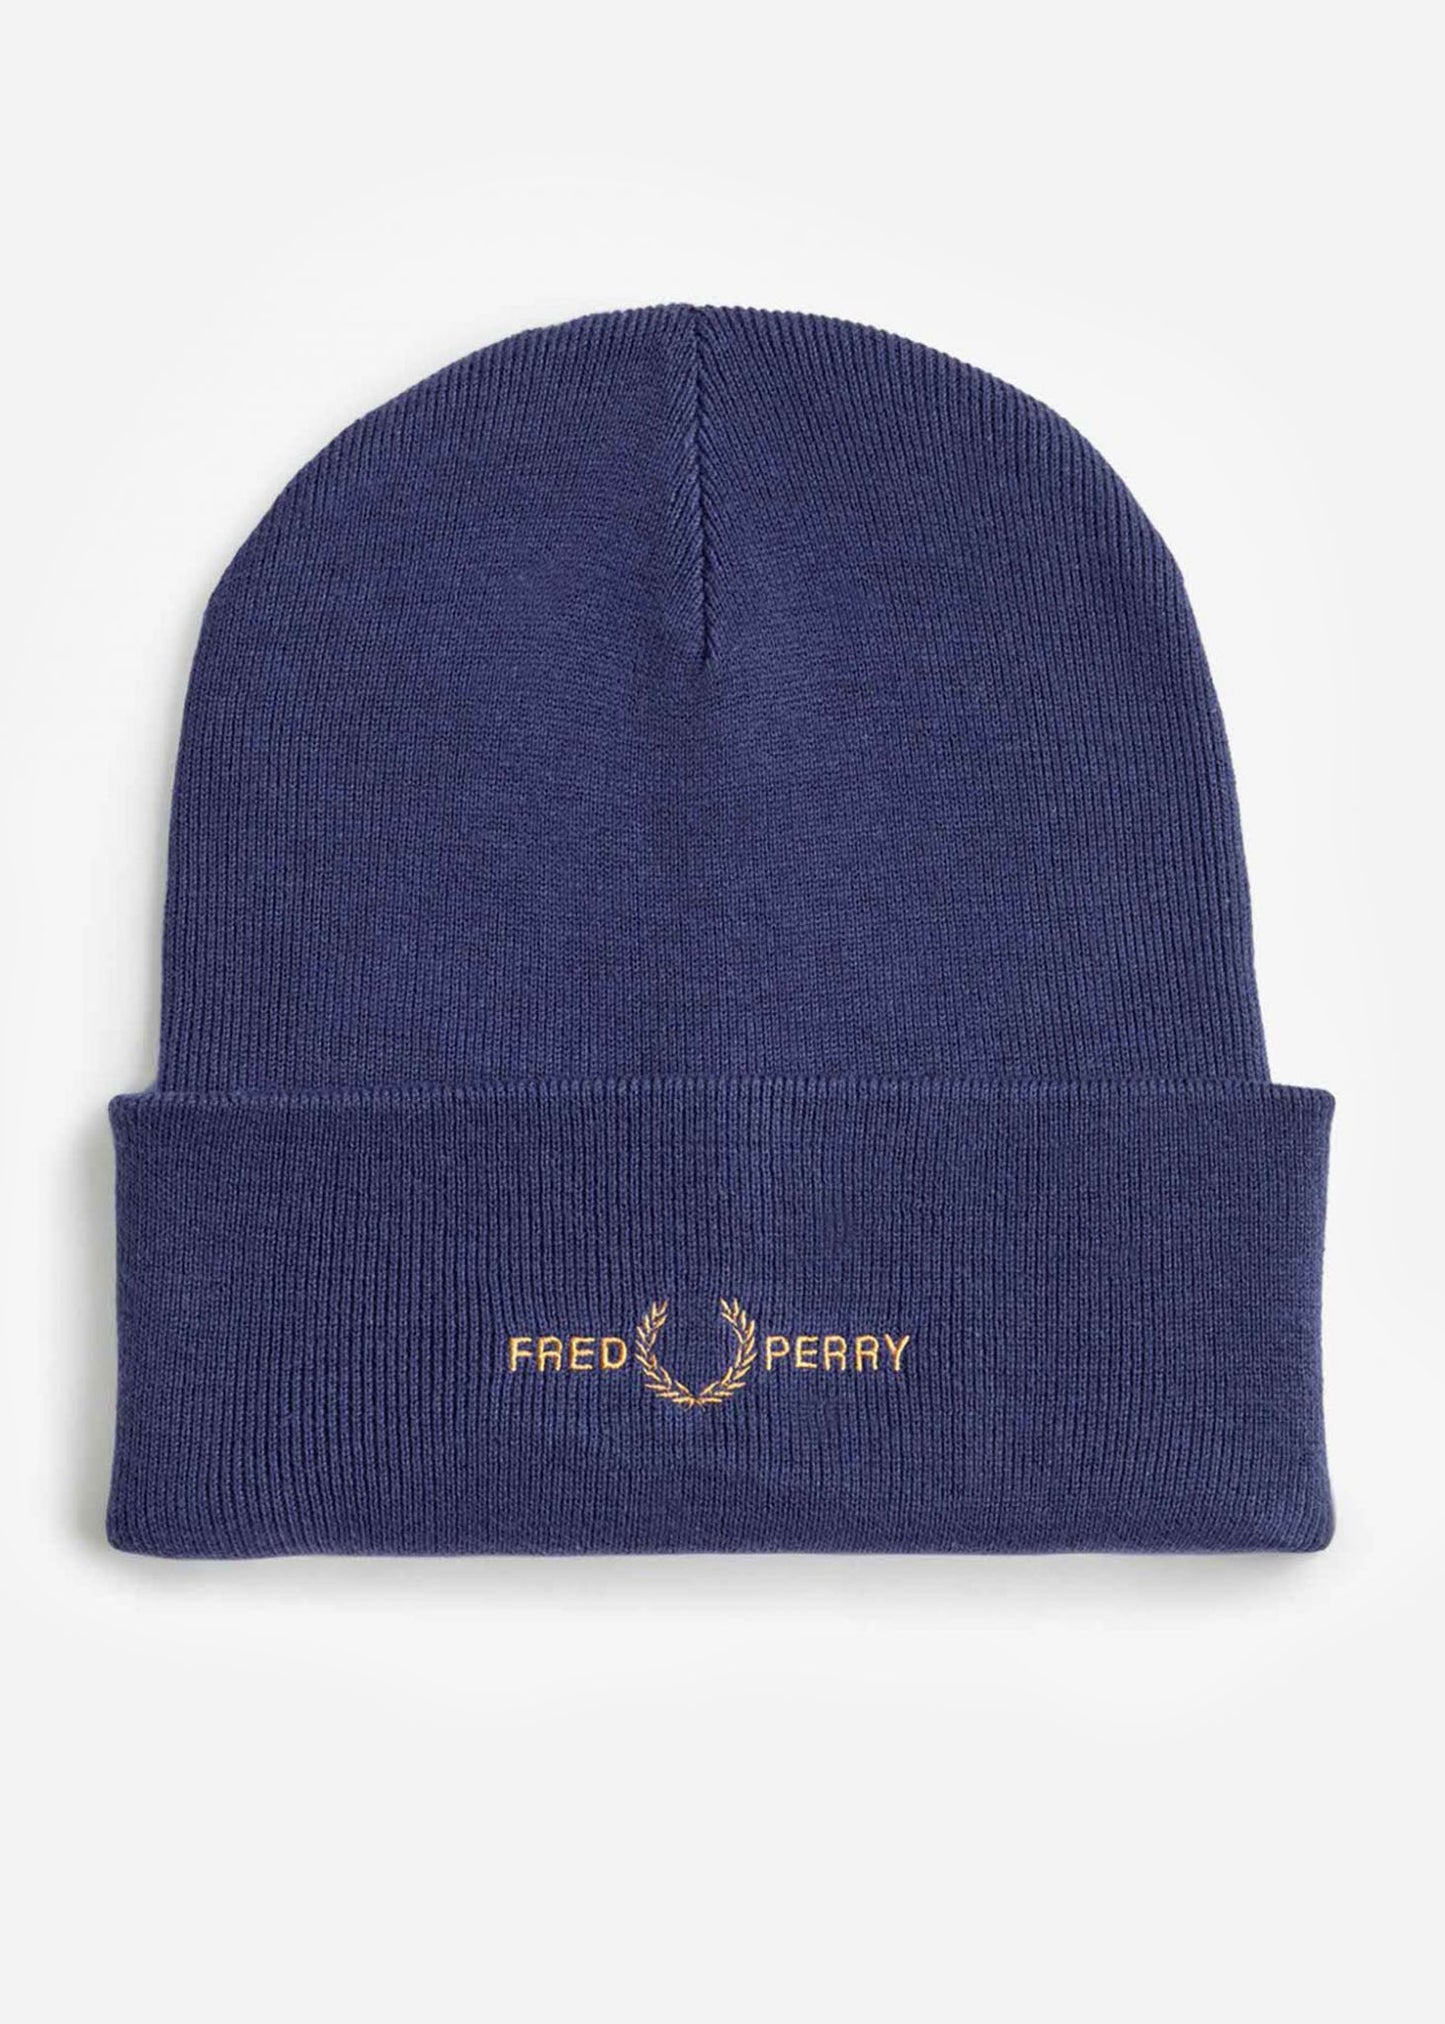 Graphic beanie - fch nvy drk crml